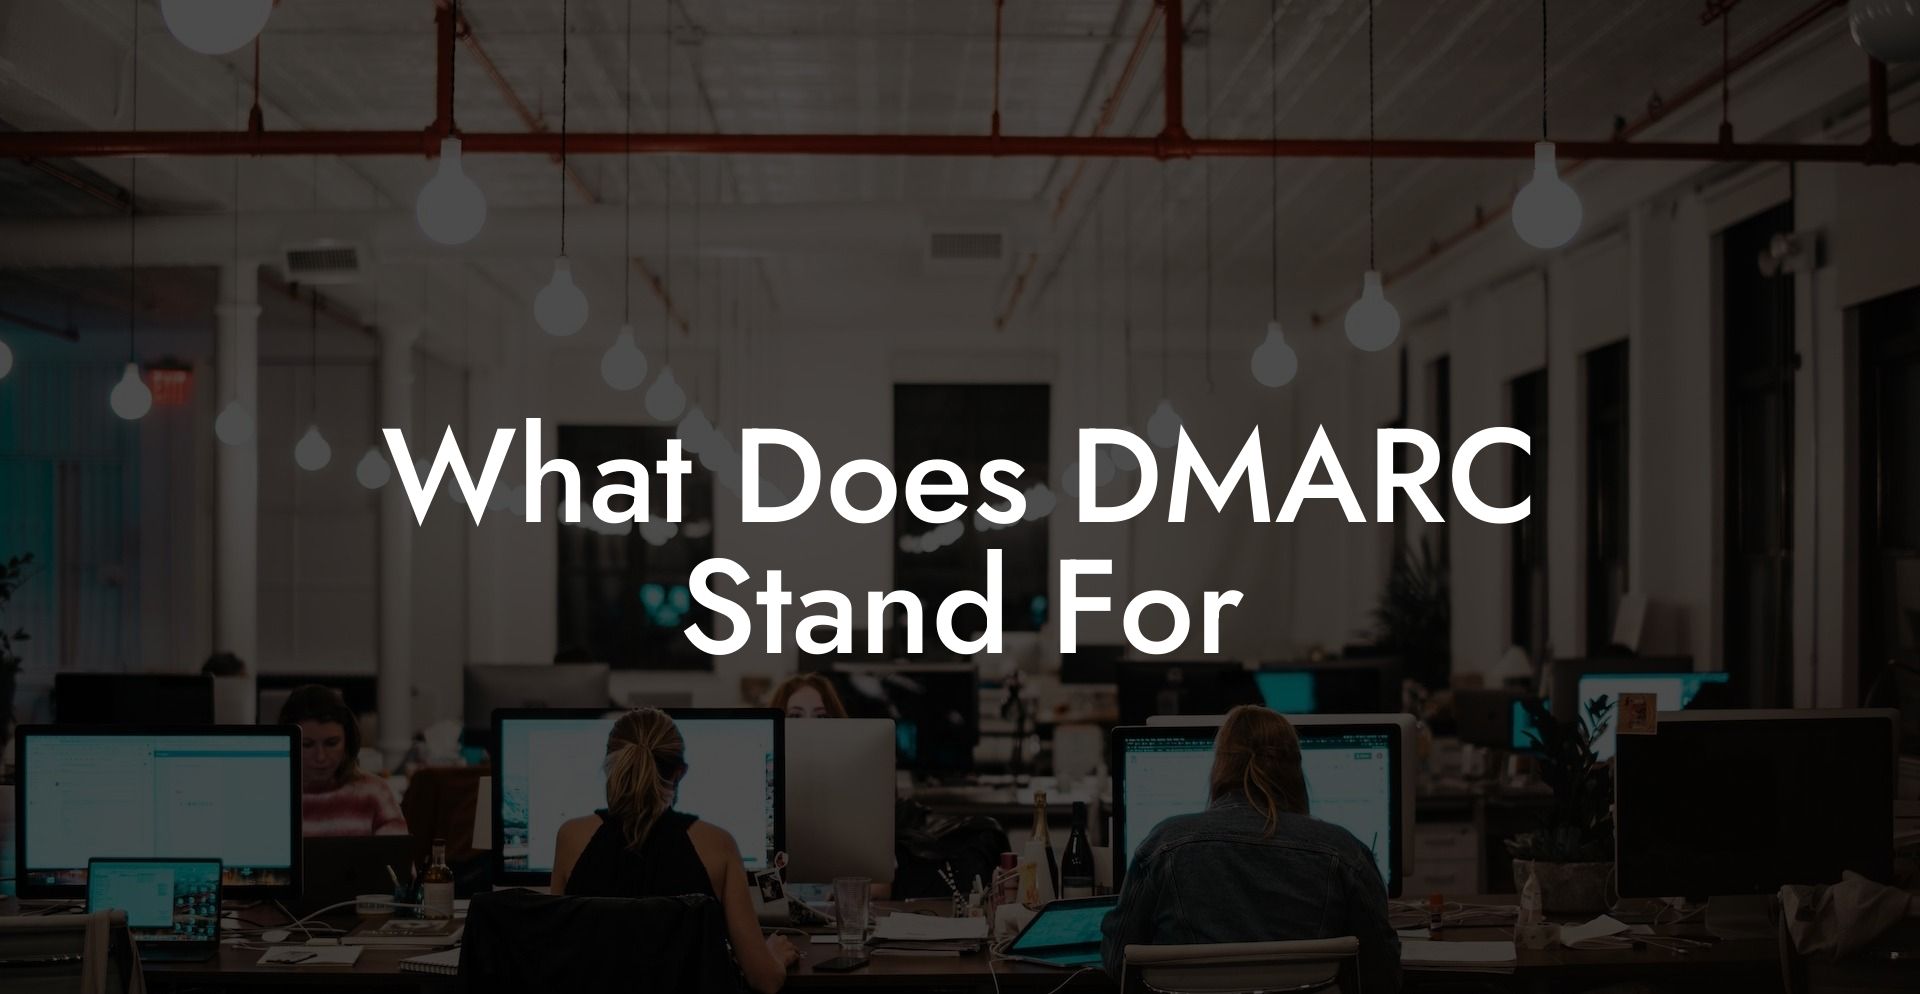 What Does DMARC Stand For